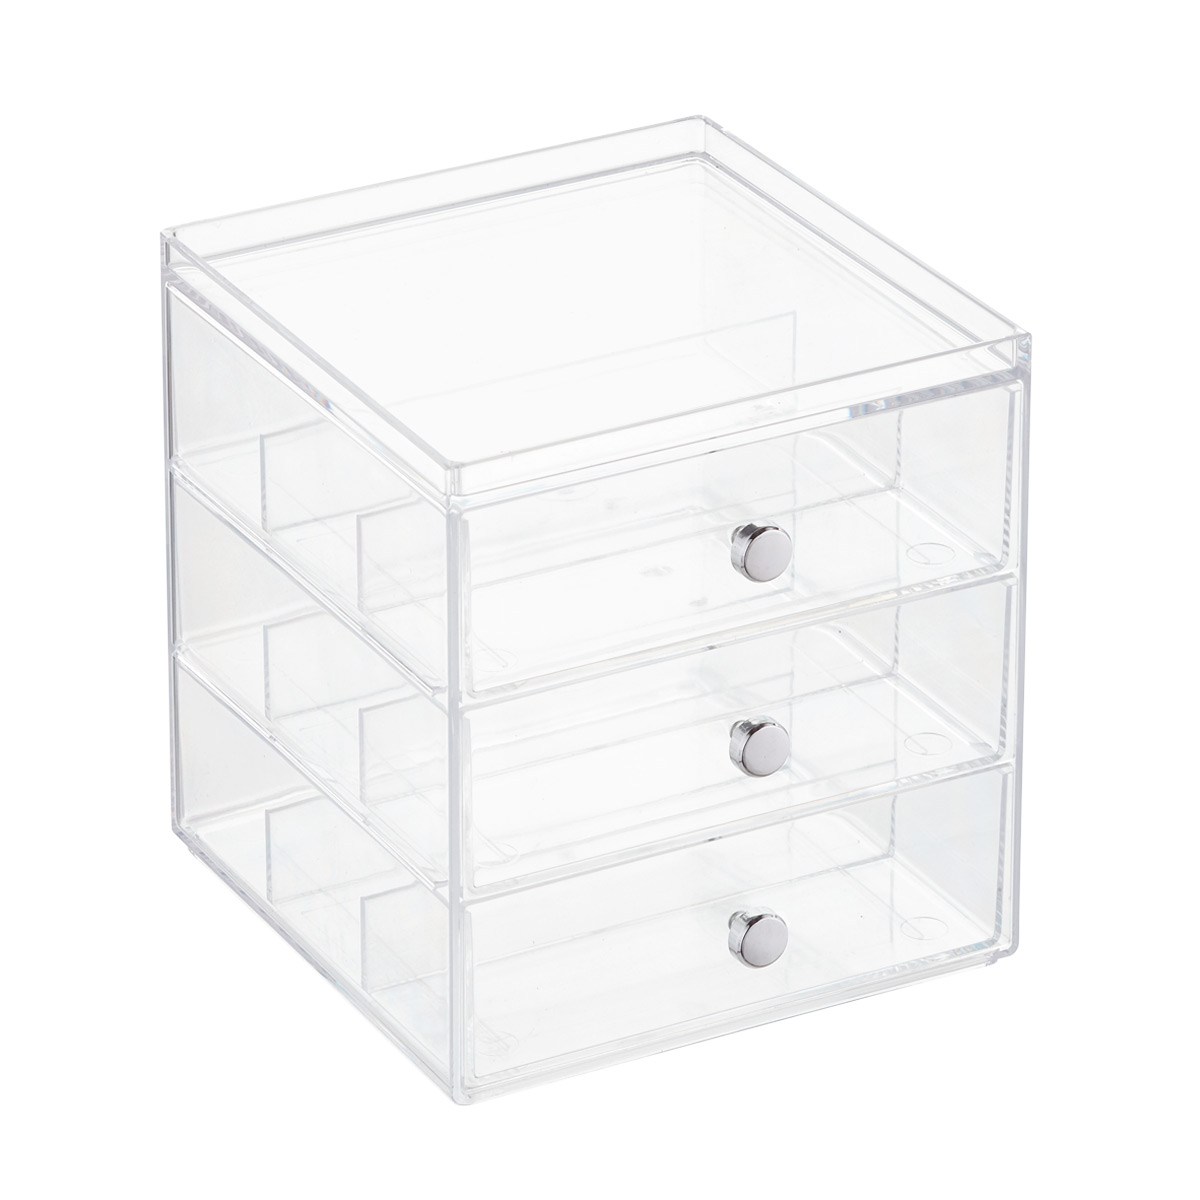 https://www.containerstore.com/catalogimages/336358/10064433-clarity-3-drawer-divided-st.jpg